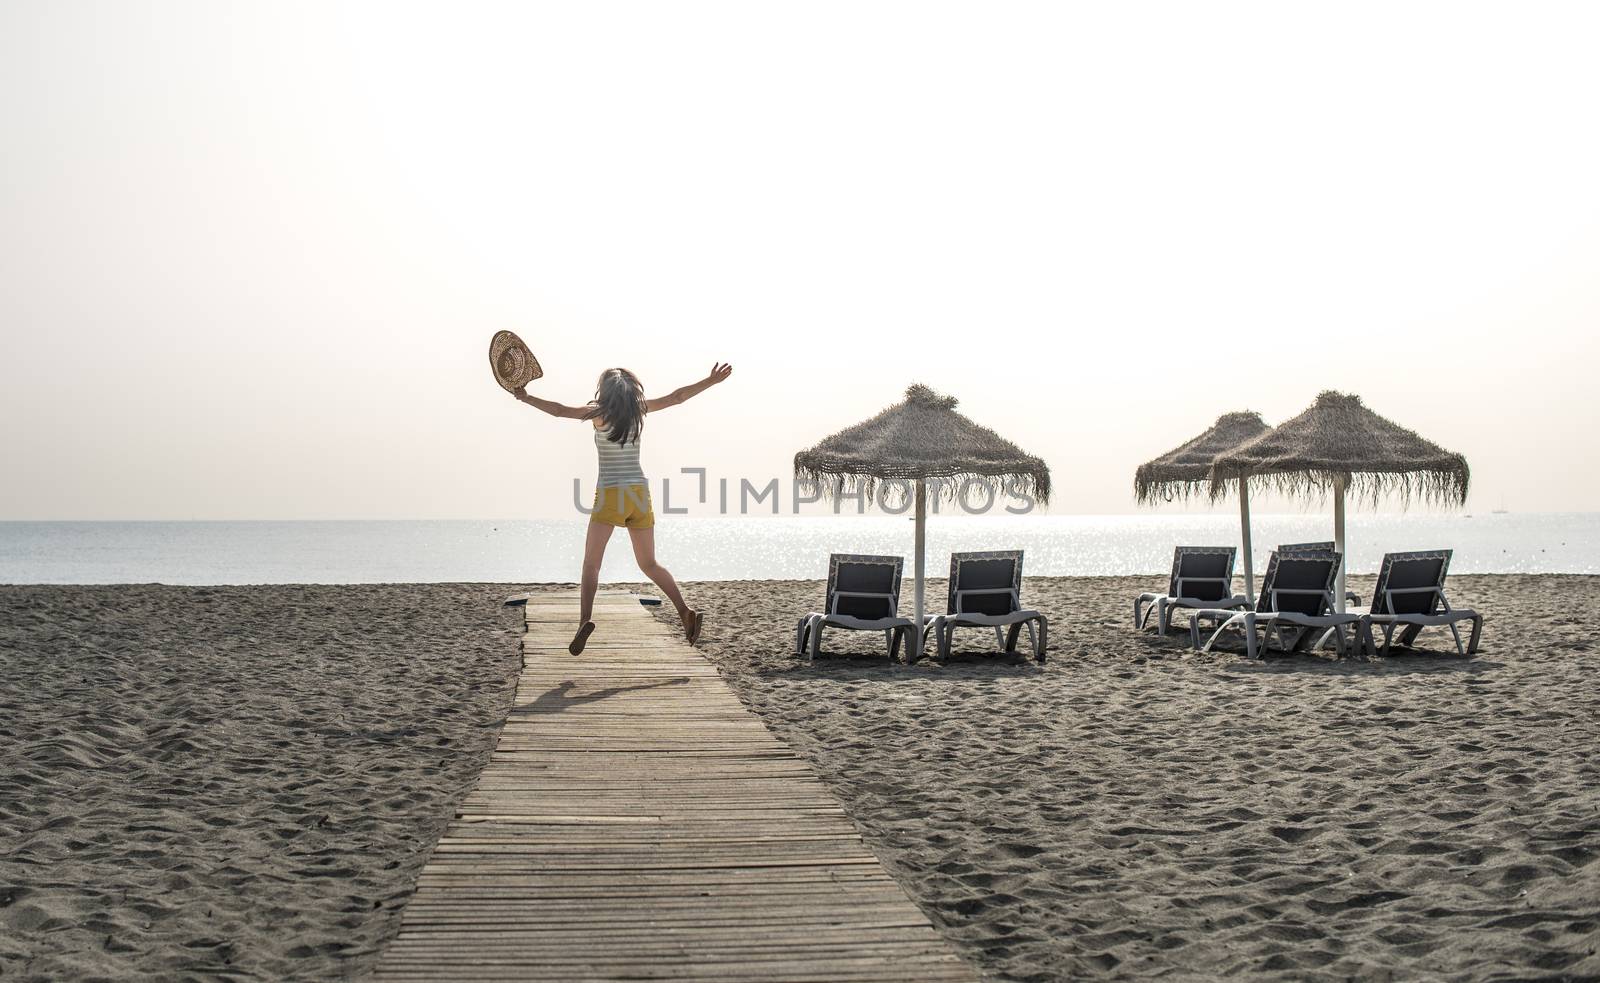 Wooden path to the beach, umbrellas and jumping woman